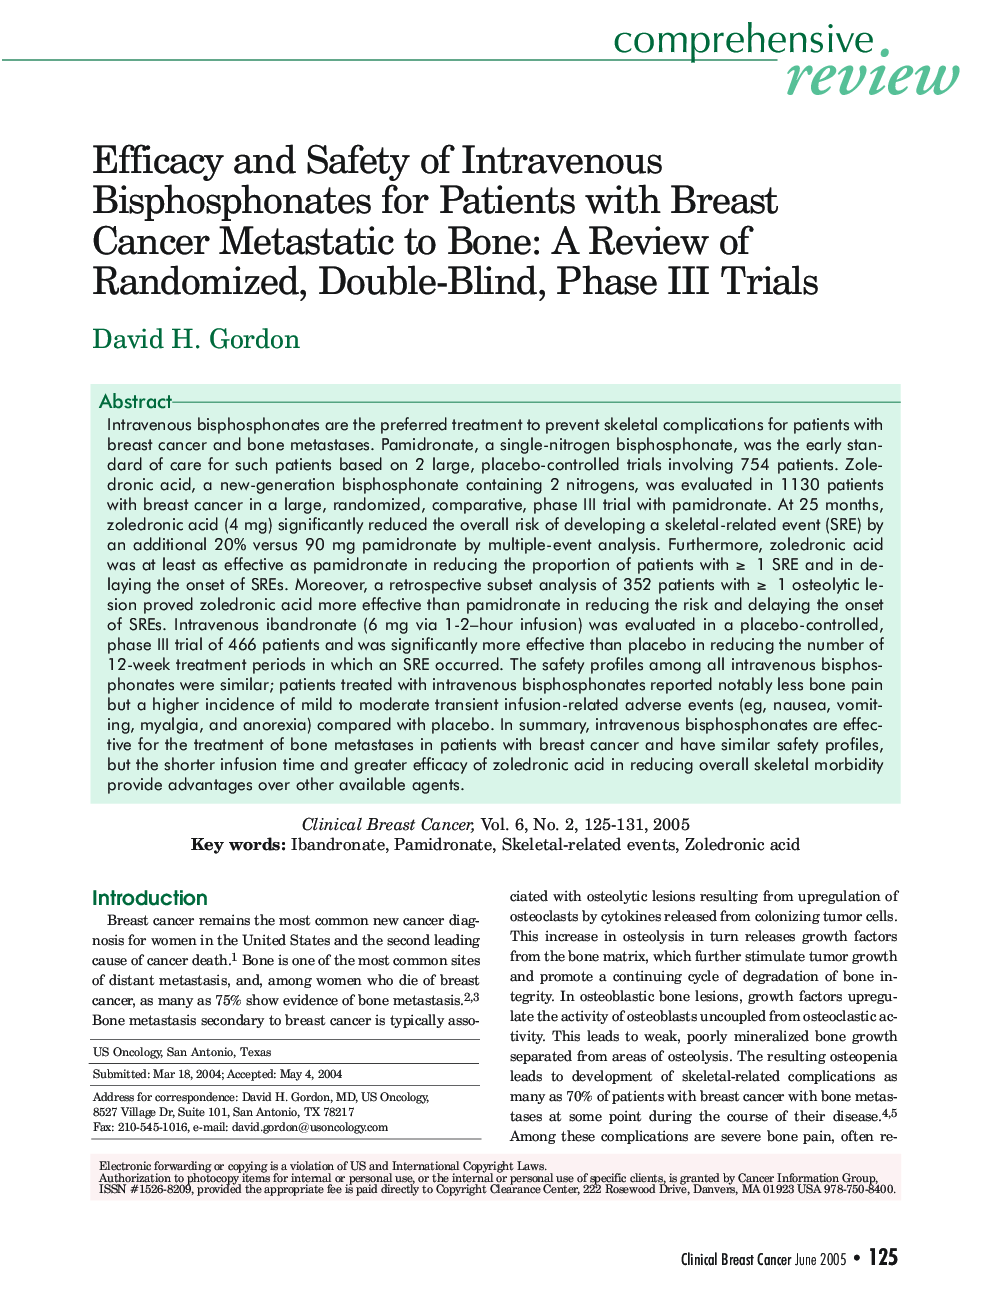 Efficacy and Safety of Intravenous Bisphosphonates for Patients with Breast Cancer Metastatic to Bone: A Review of Randomized, Double-Blind, Phase III Trials